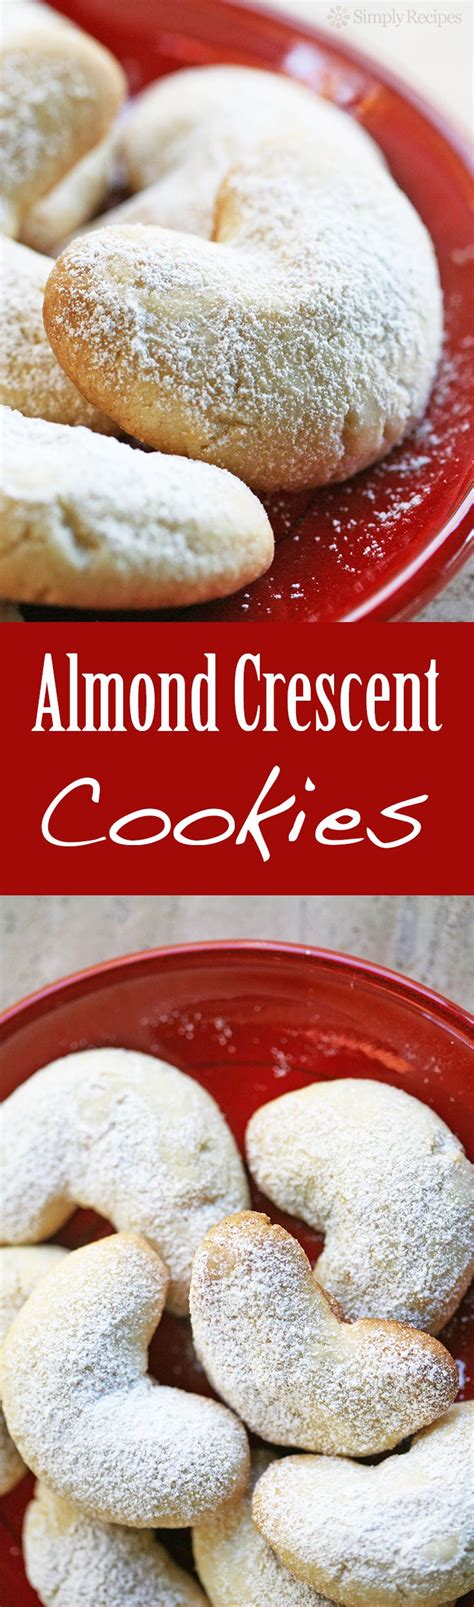 Mini almond cookie bitesconfessions of a busy mom. Almond Flour Christmas Cookies : 21 Best Almond Flour Christmas Cookies - Best Recipes Ever ...